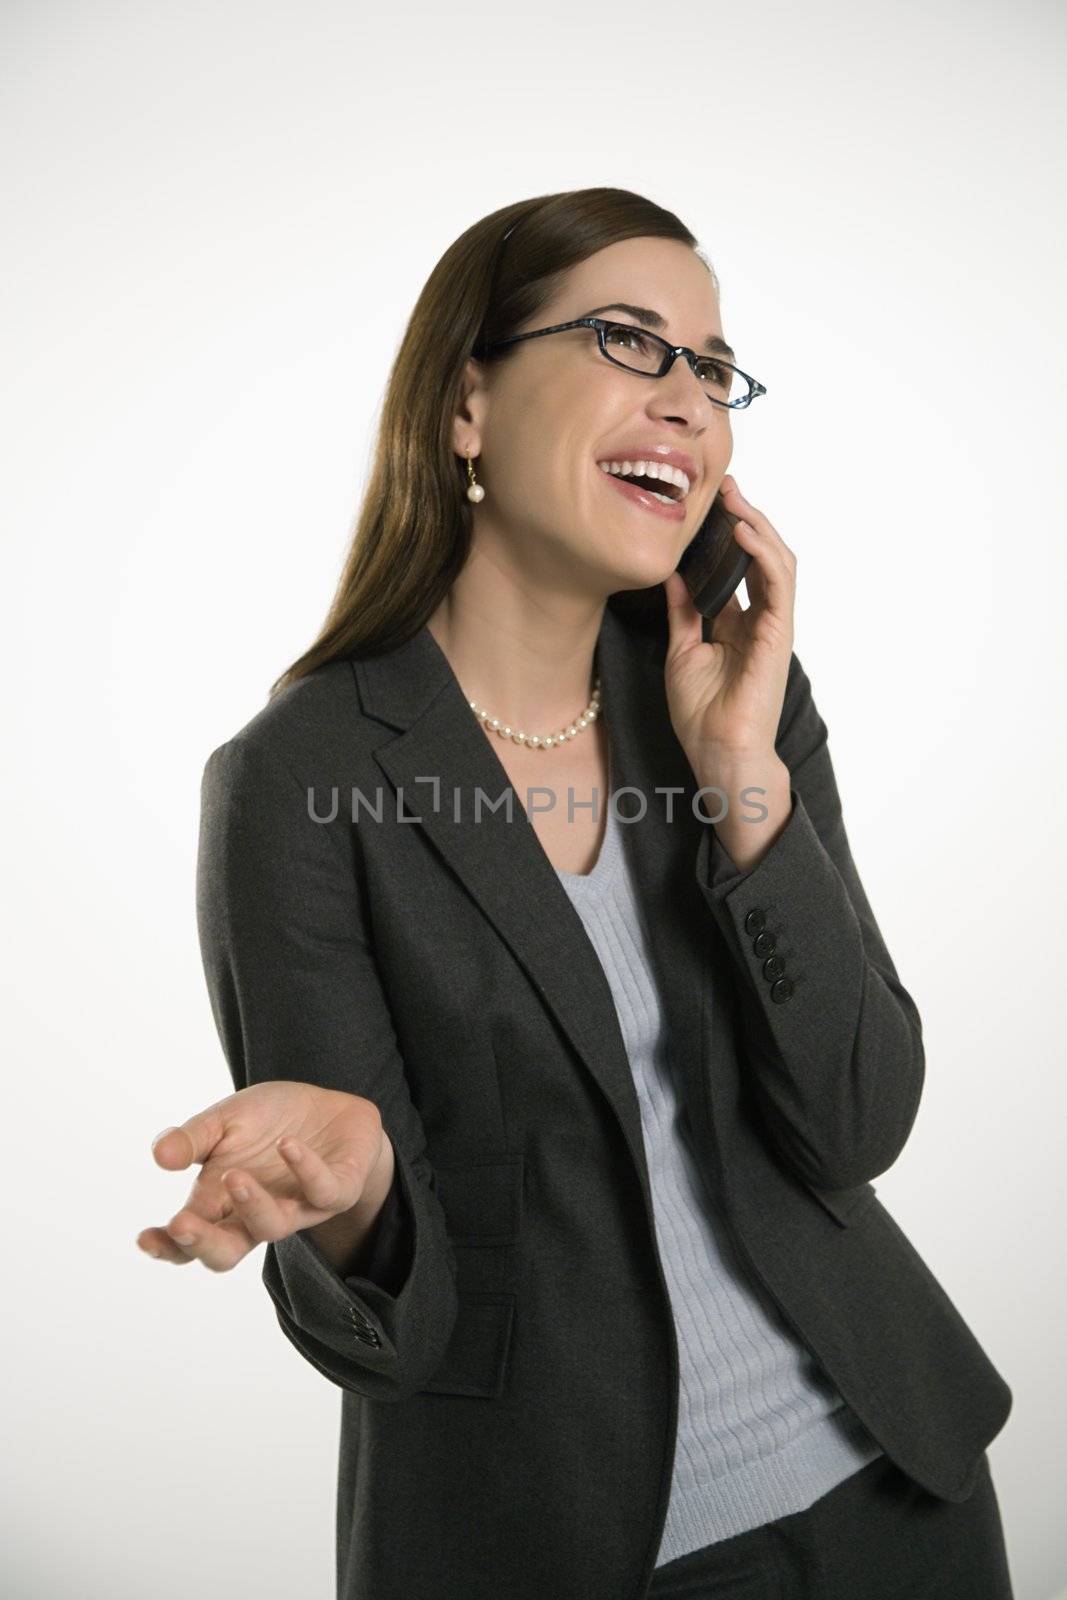 Caucasian mid adult professional business woman talking on cell phone with hand out and smiling.